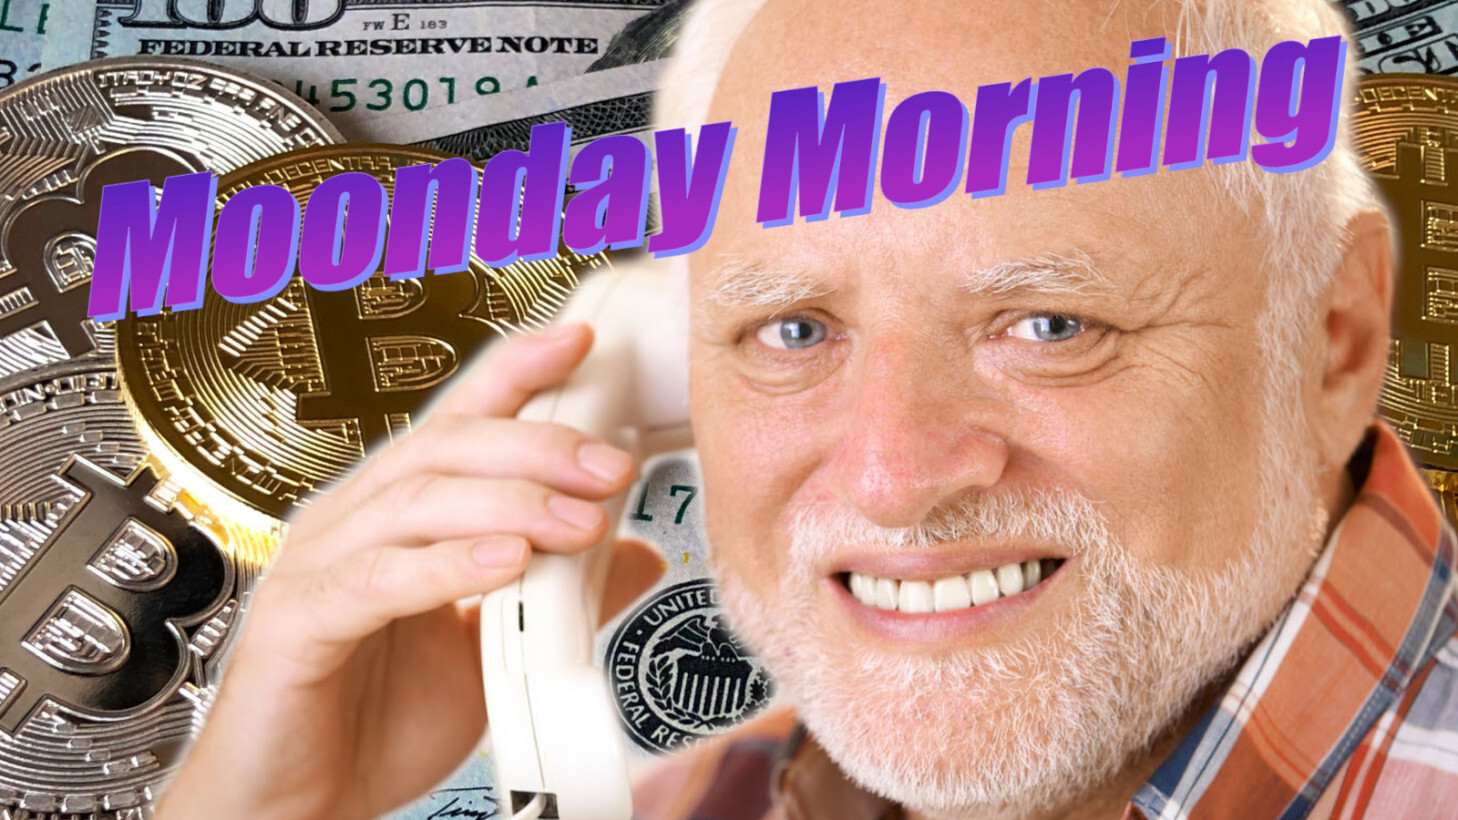 Moonday Mornings: It’s 2020 and the OneCoin scam is still alive